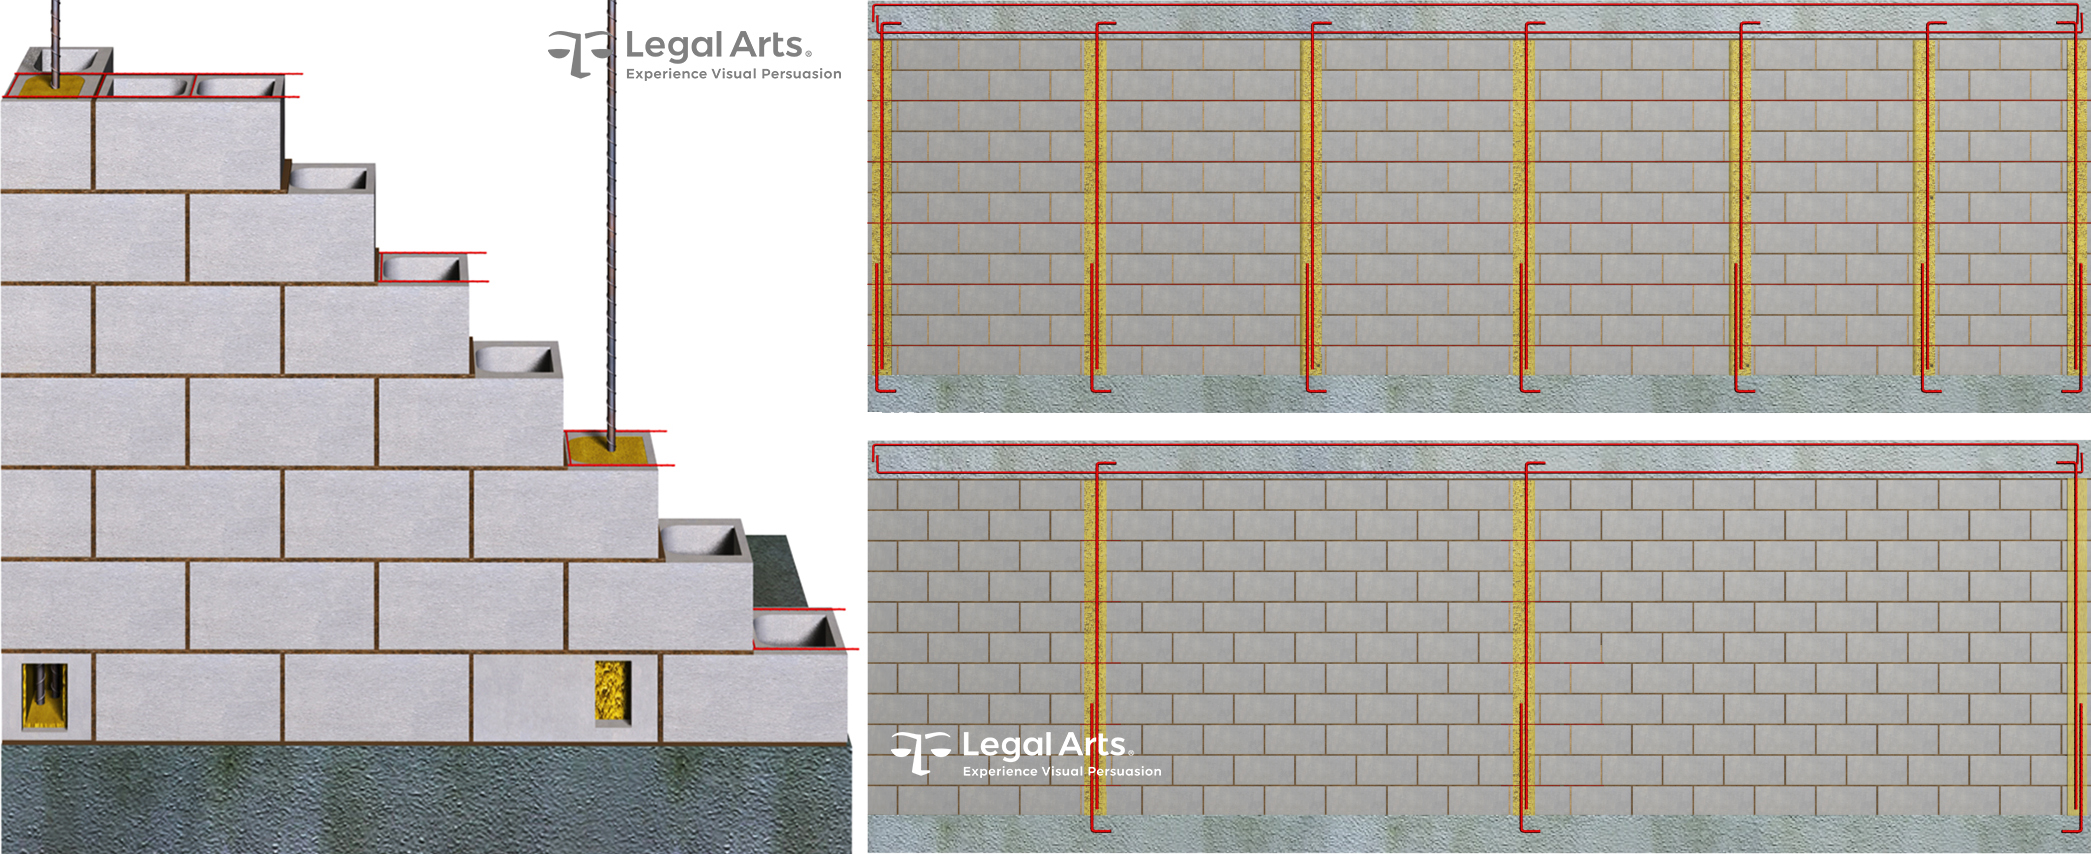 To-code concrete block wall construction features both vertical and horizontal steel reinforcement and grout-filled cores (left and top right). The as-built condition missed 94% of horizontal and 54% of vertical steel.